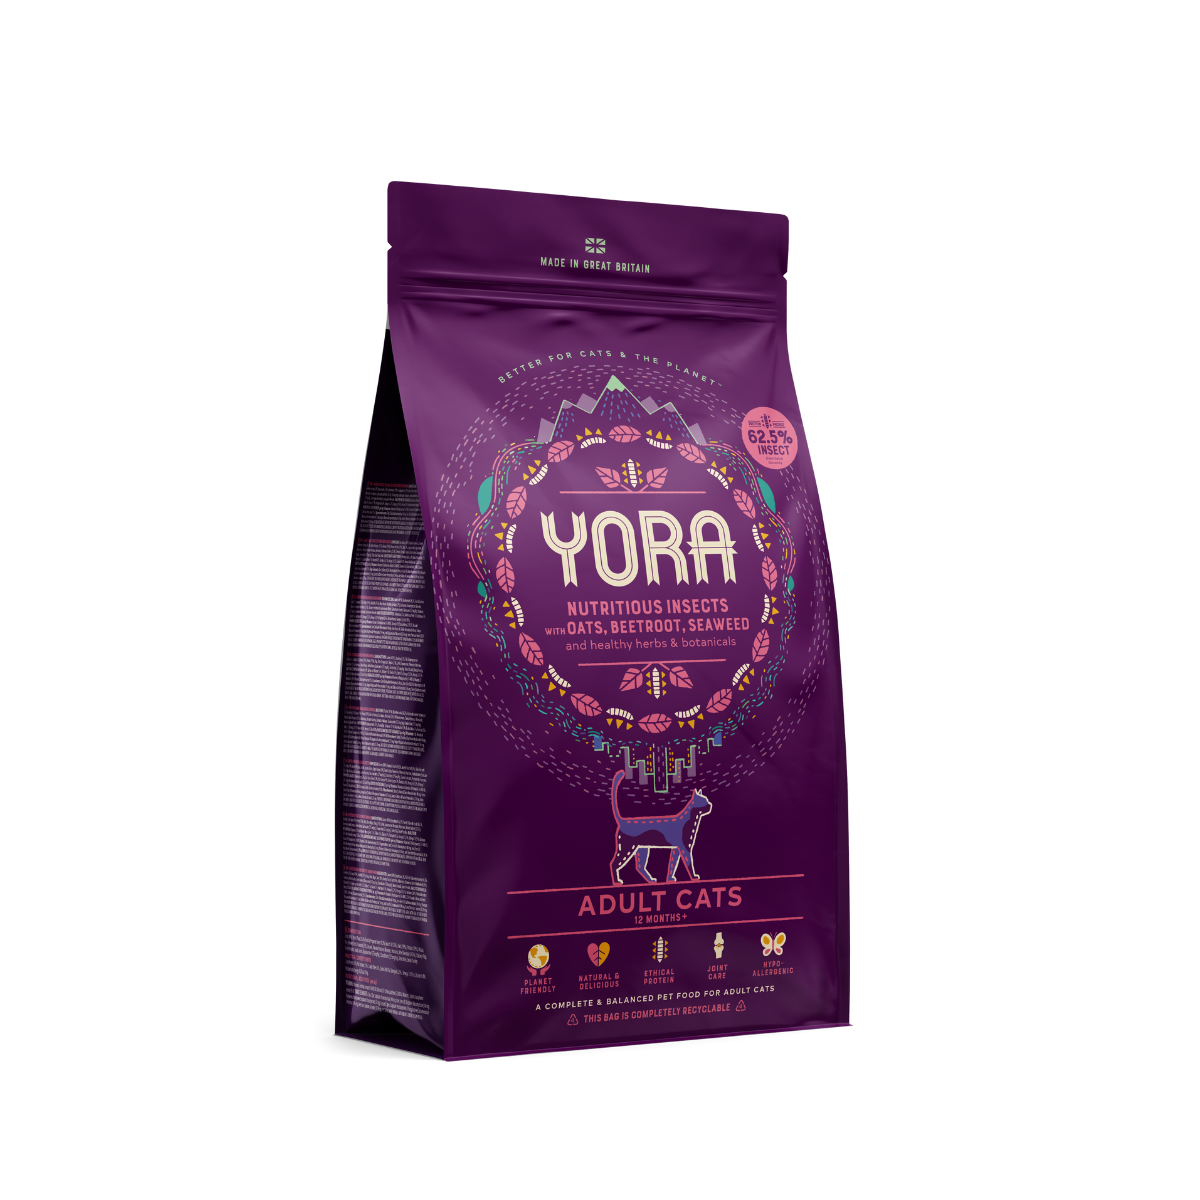 YORA insect (insect) super food for adult cats COMPLETE ADULT